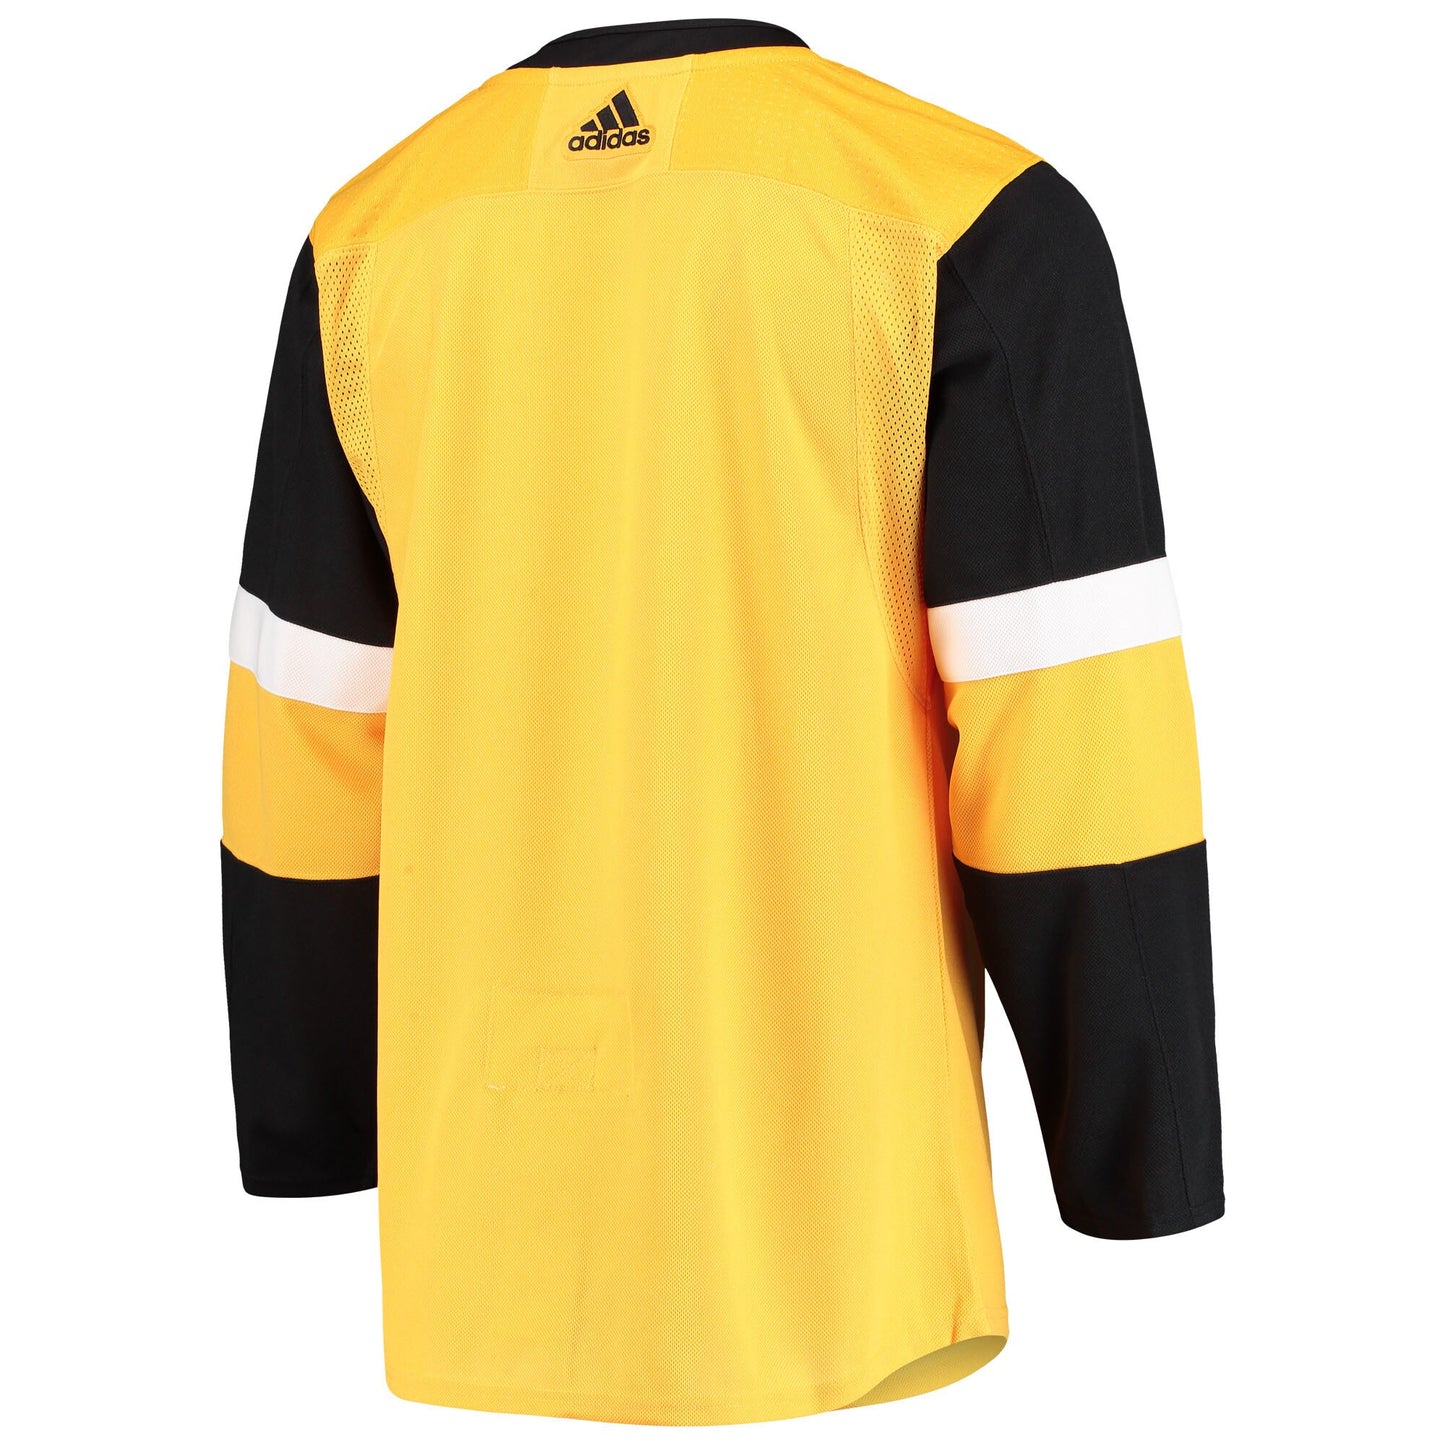 Pittsburgh Penguins adidas Alternate Authentic Team Jersey - Gold